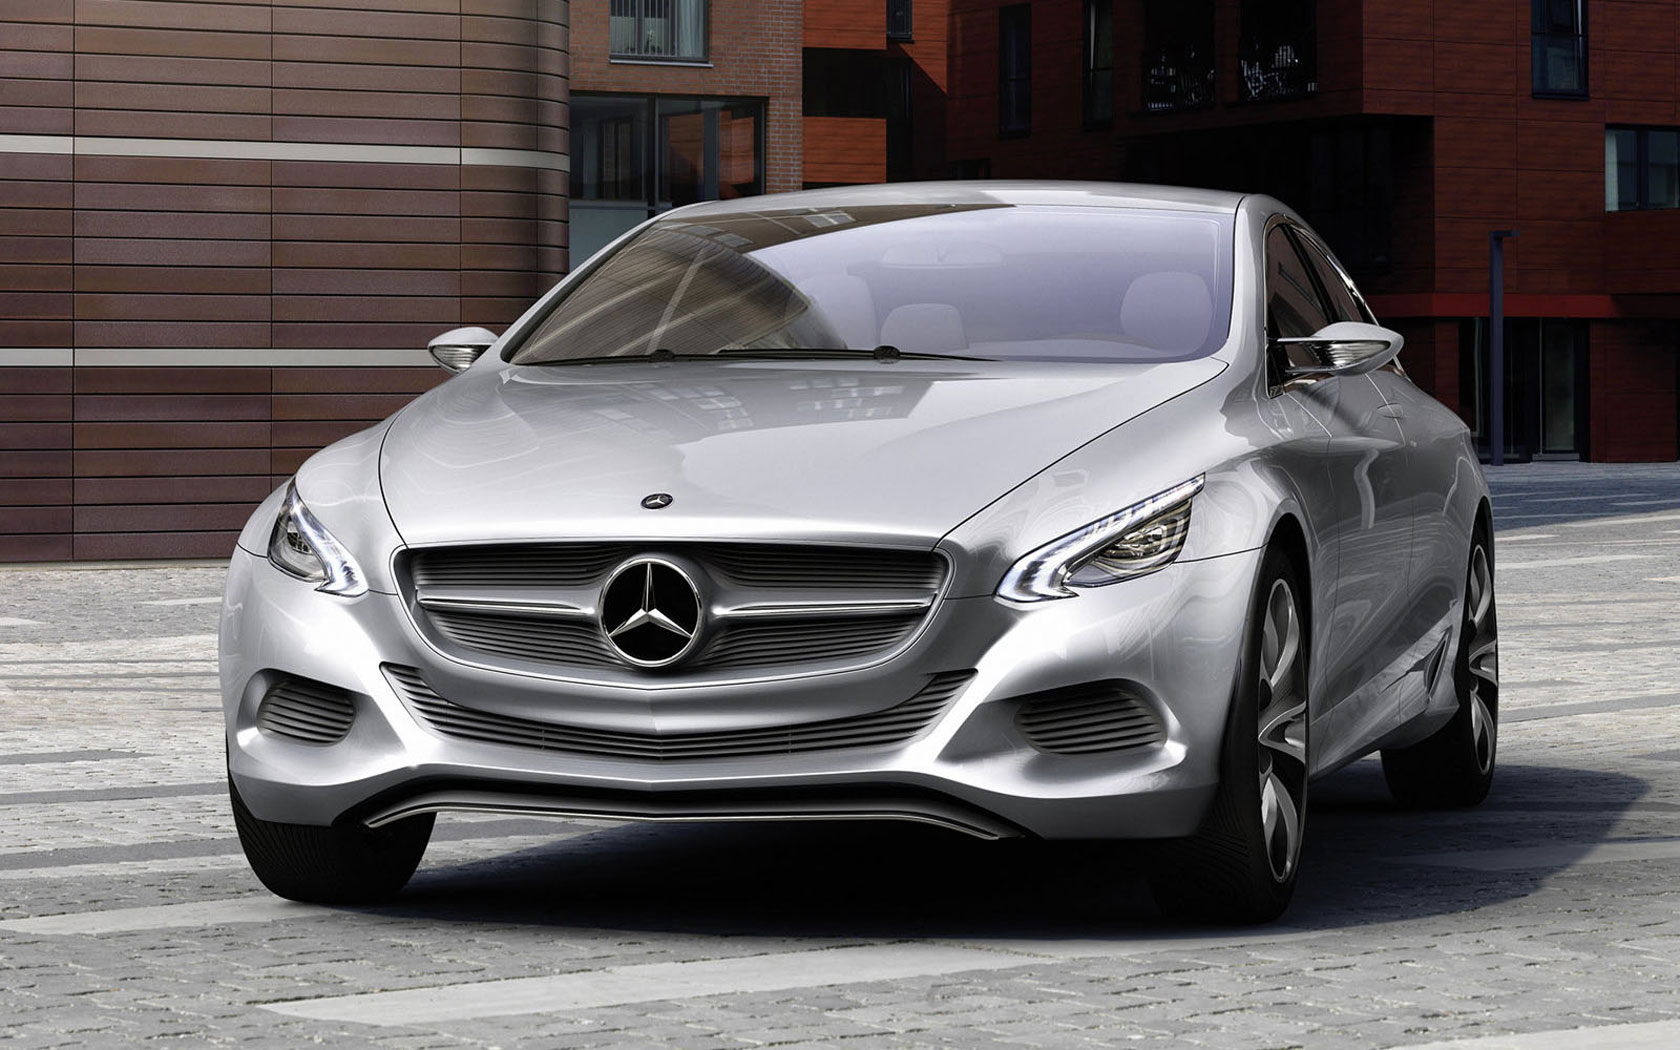  Mercedes F800 Style Concept 